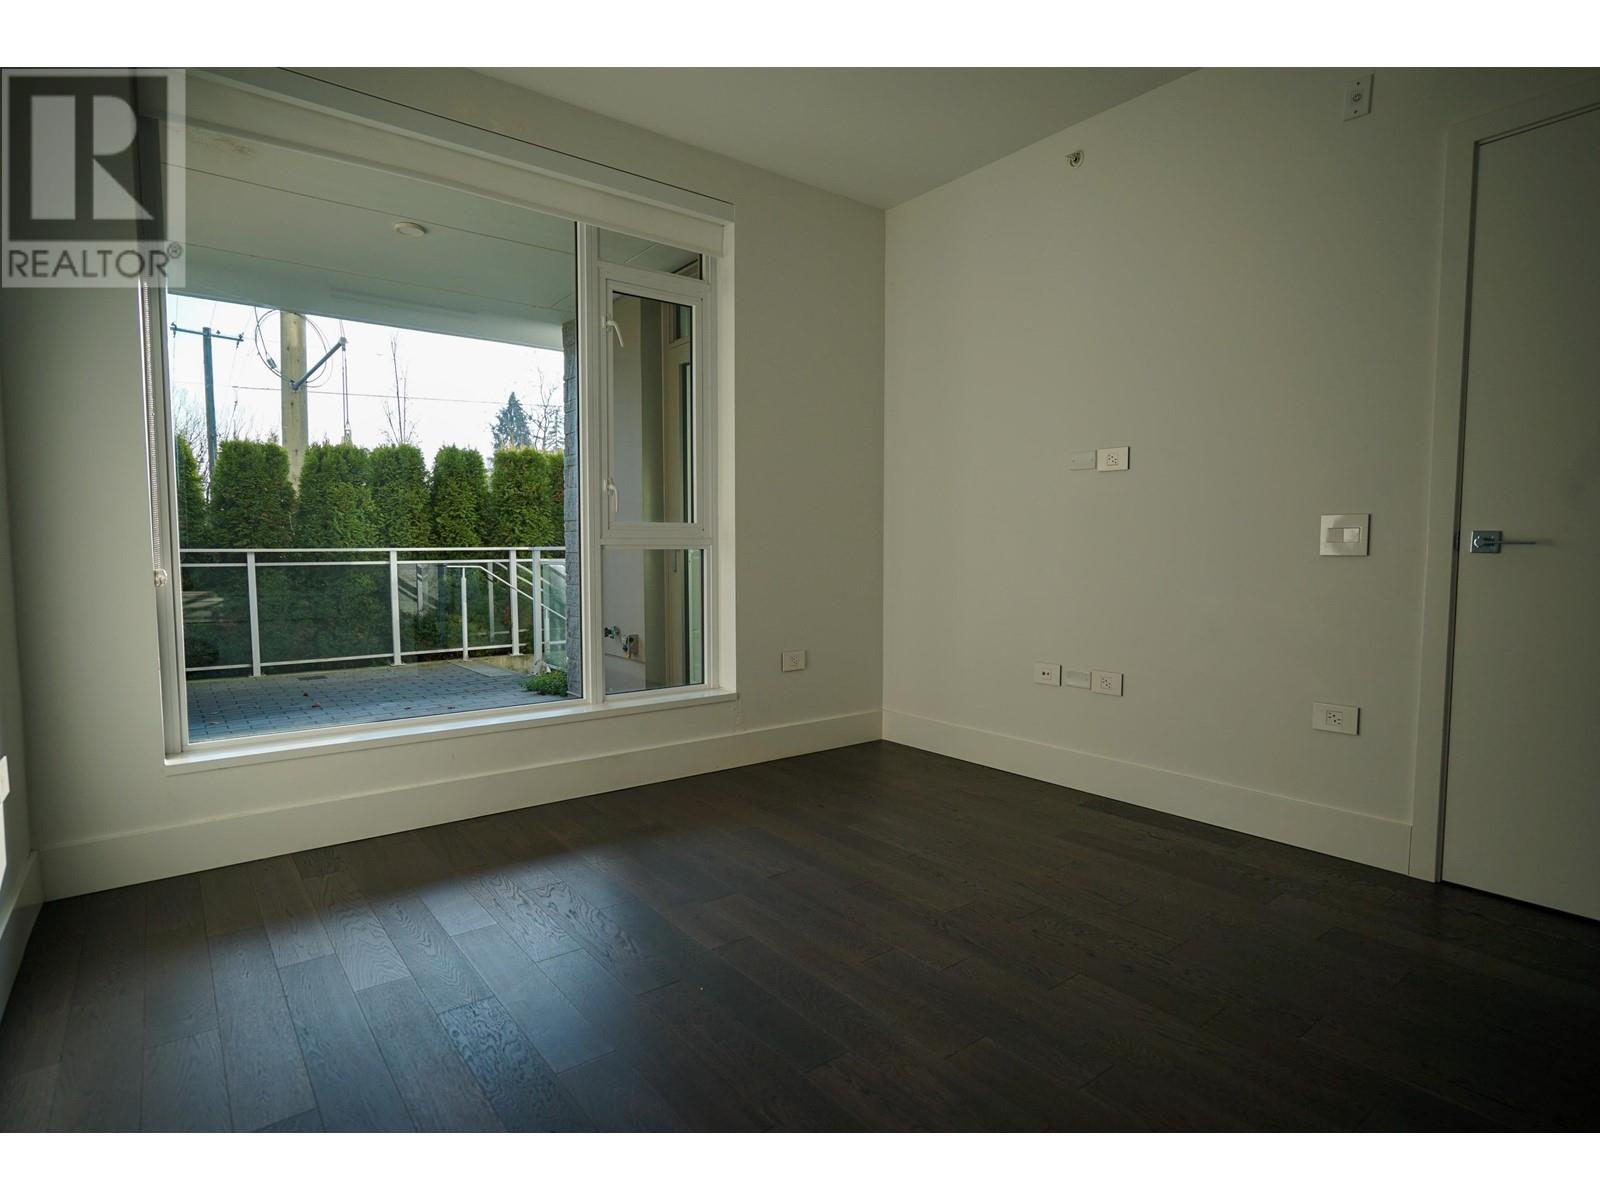 Listing Picture 9 of 29 : 106 375 W 59TH AVENUE, Vancouver / 溫哥華 - 魯藝地產 Yvonne Lu Group - MLS Medallion Club Member